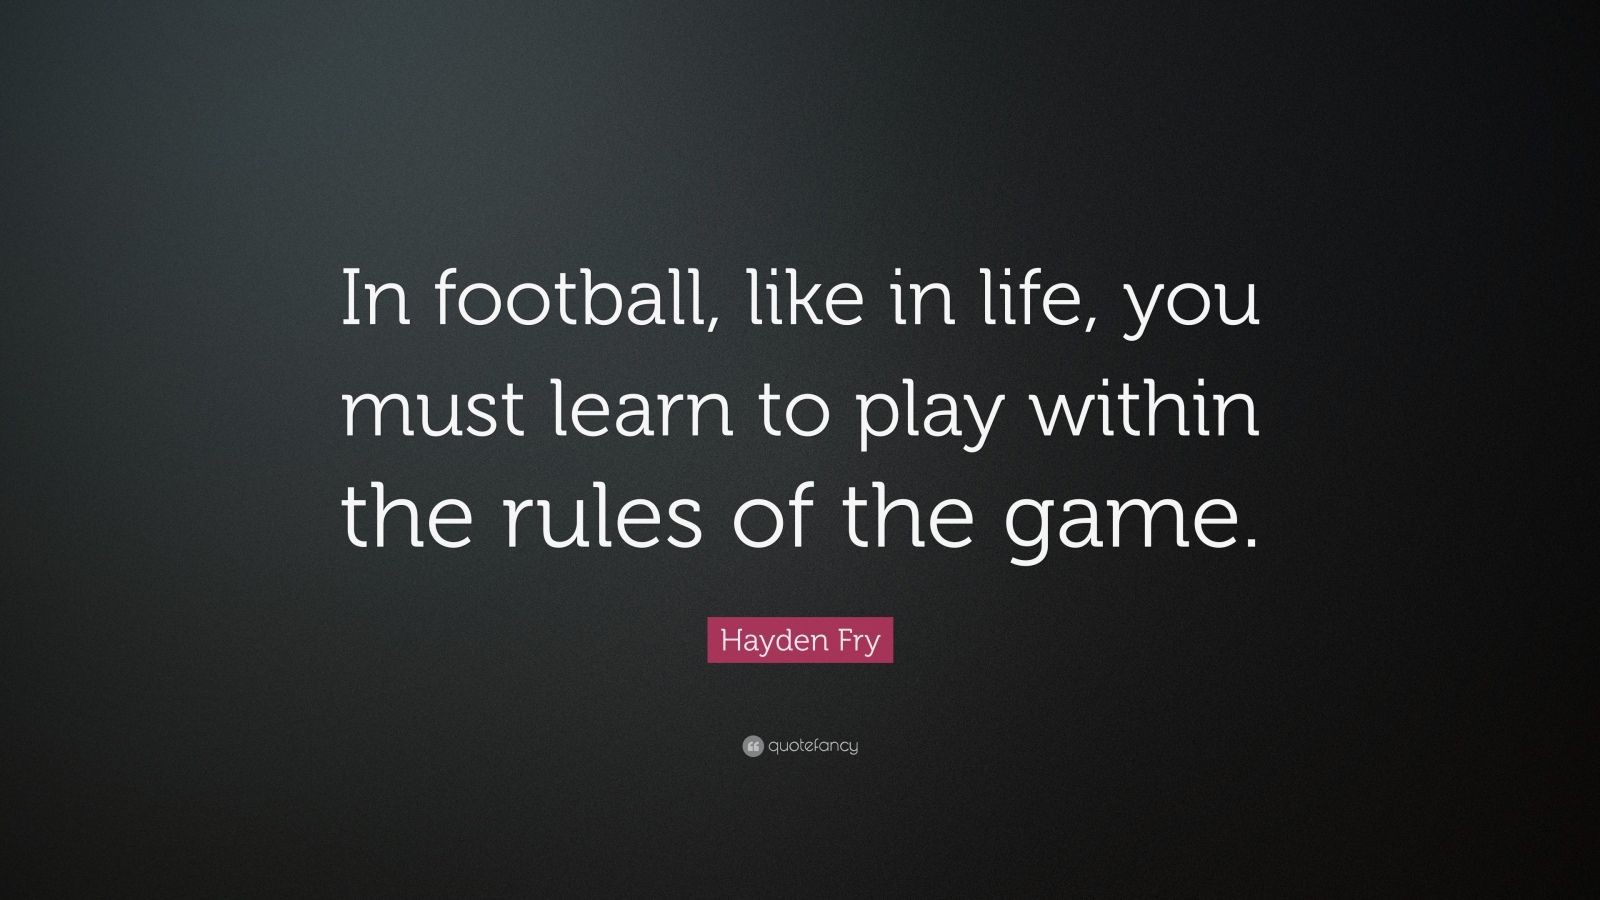 Just try new. Quotes about Football. Quotes about women Football. Rules of Life. Clocks are like Football.